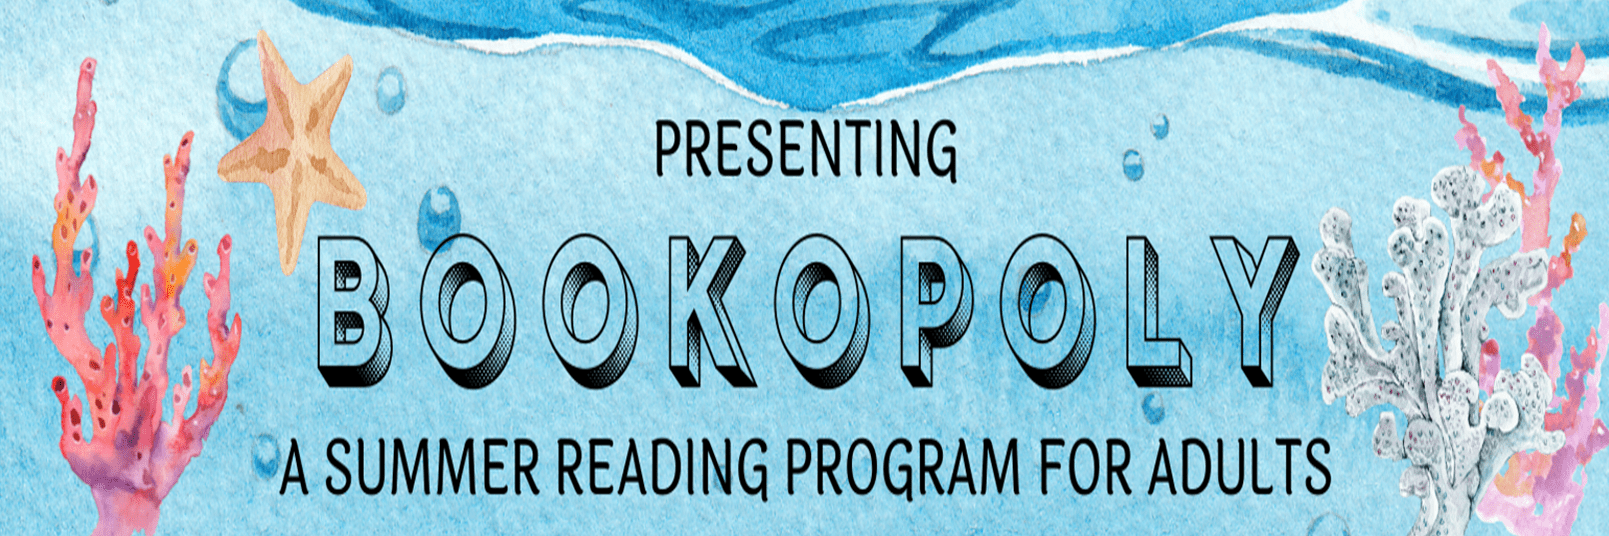 Bookopoly - a summer reading program for adults